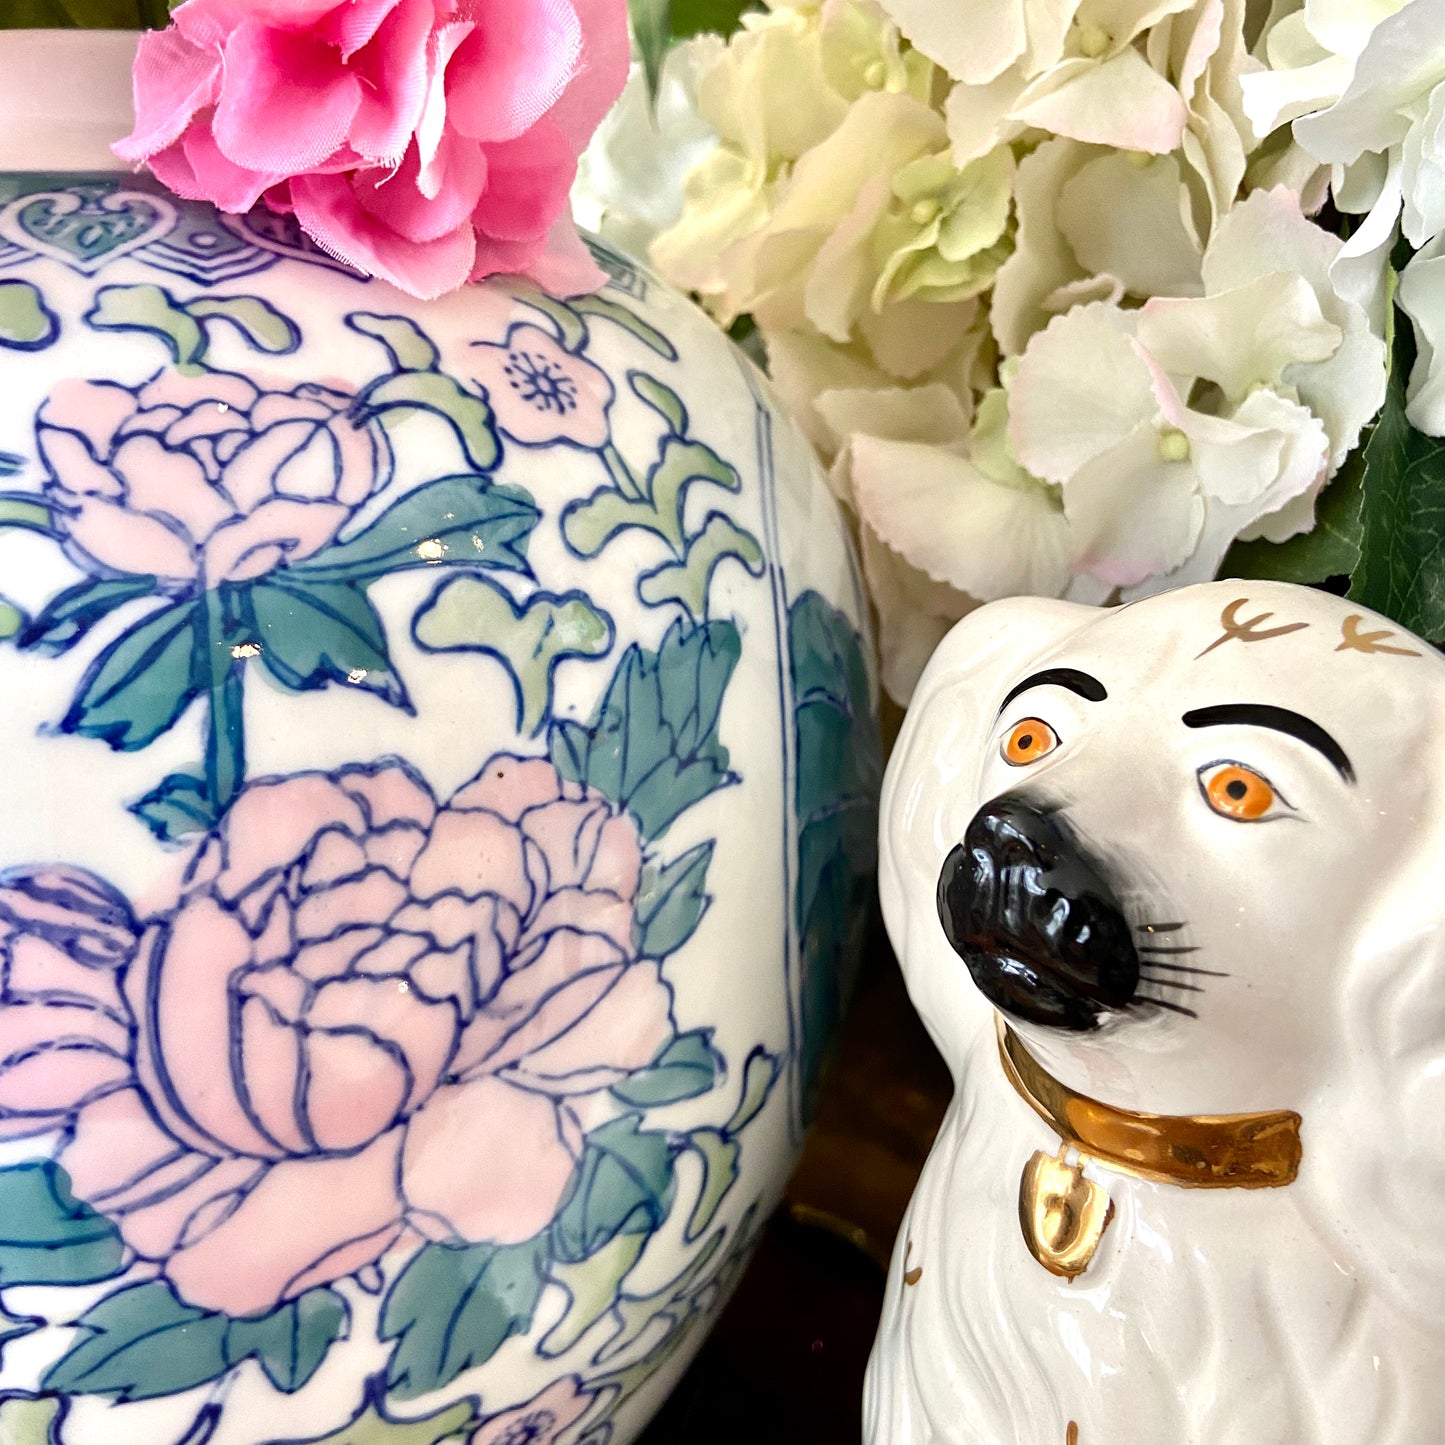 Massive chinoiserie ginger jar with bird and botanical design